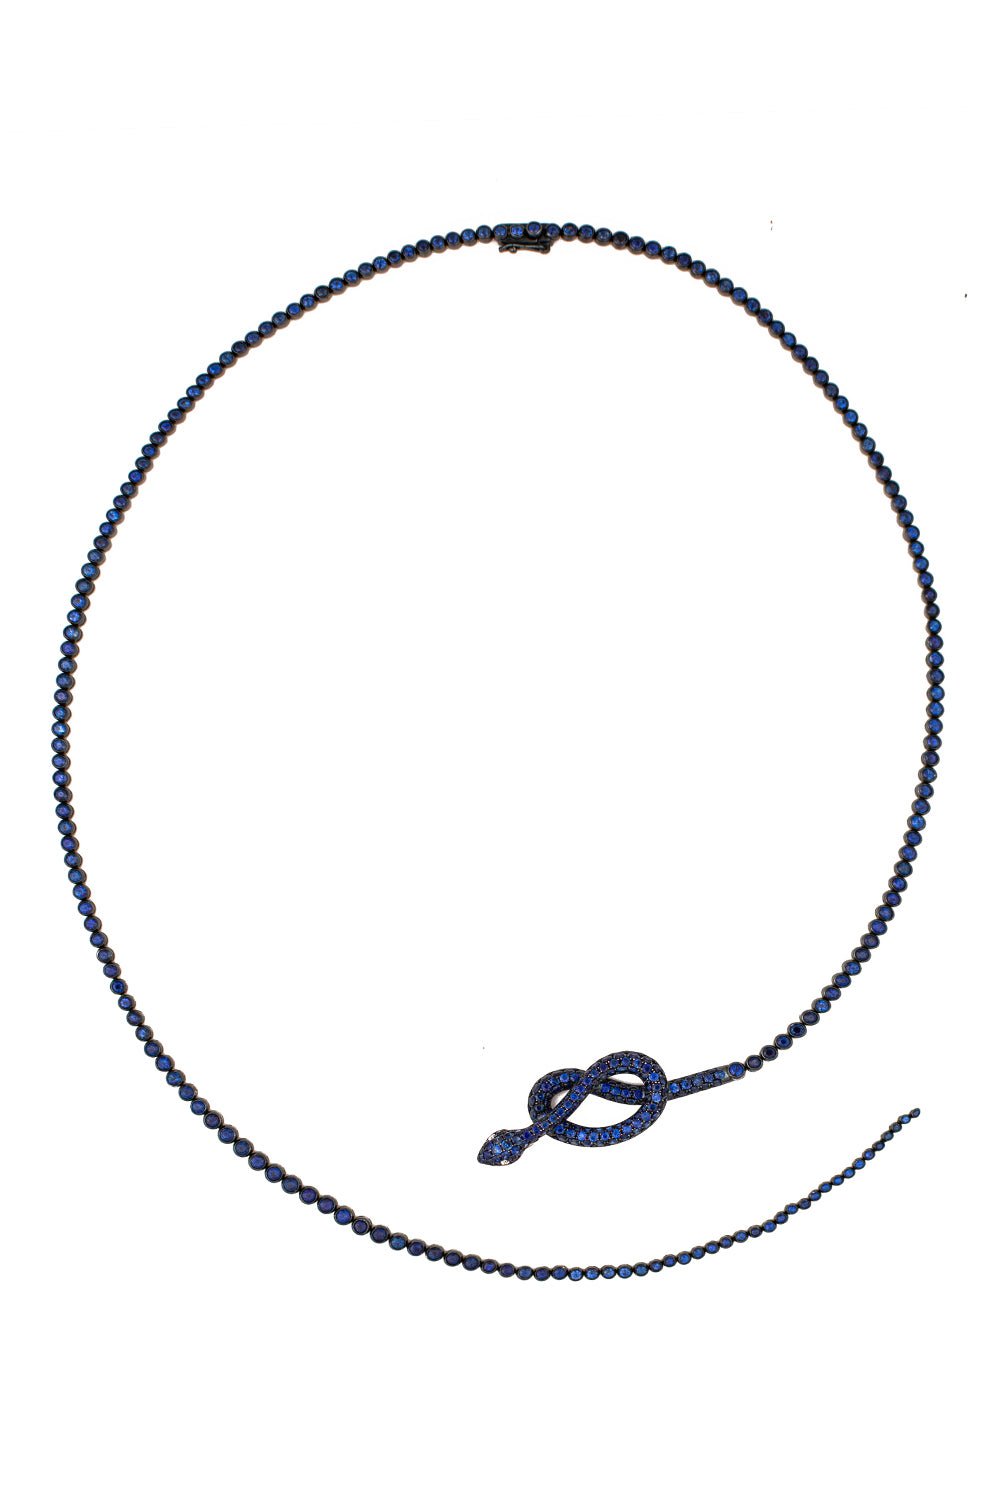 STEFERE-Blue Sapphire Snake Necklace-WHITE GOLD